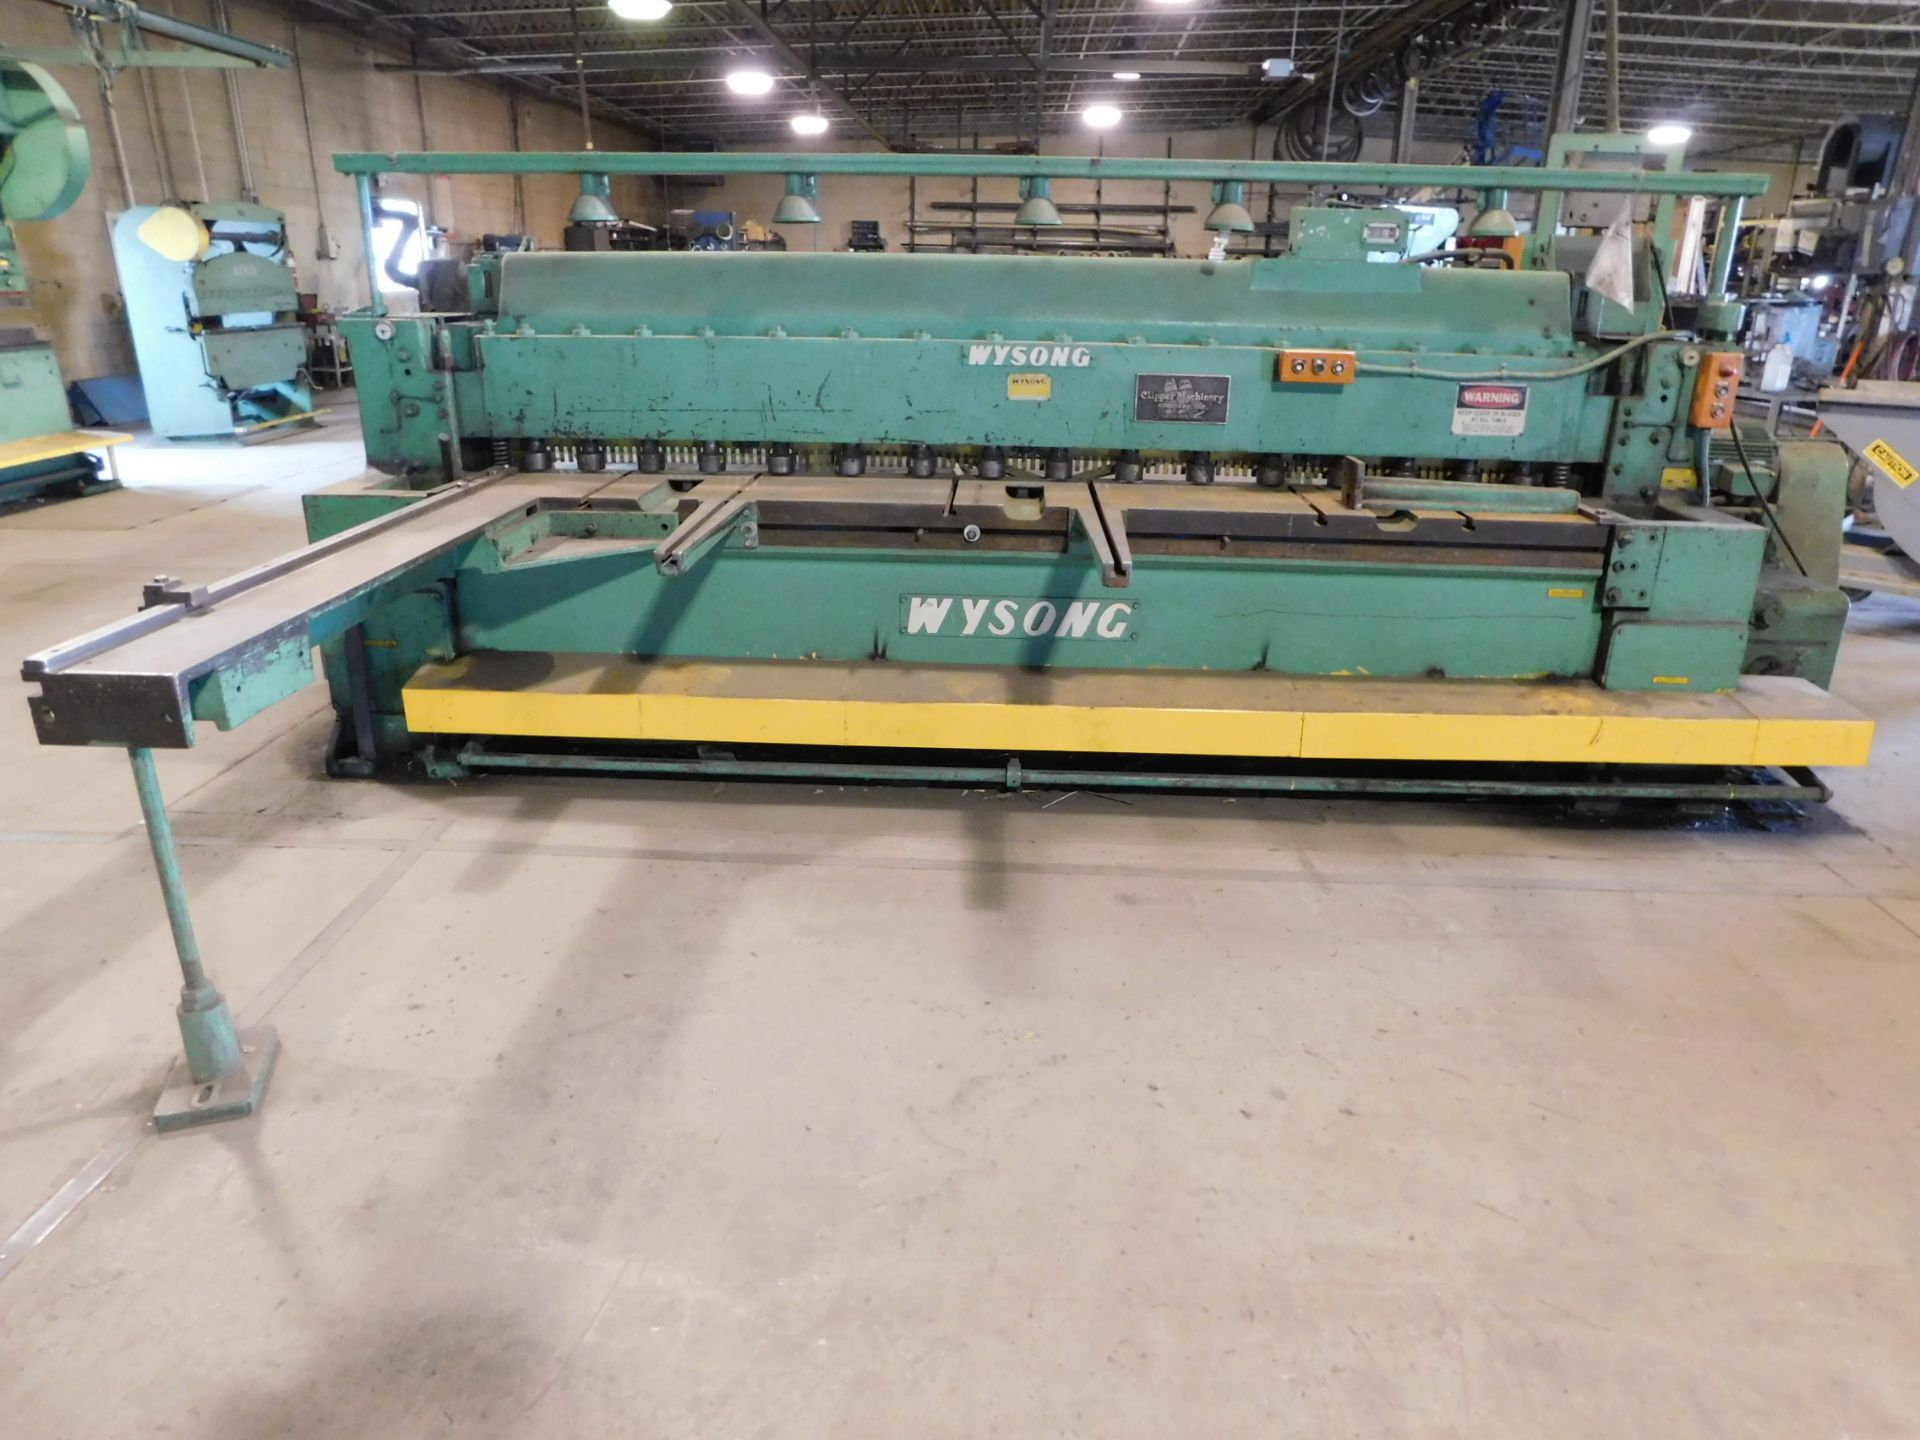 Wysong Model 1025 Power Squaring Shear, SN P37-372, 6' Squaring Arm, (3) Front Support Arms, 36"